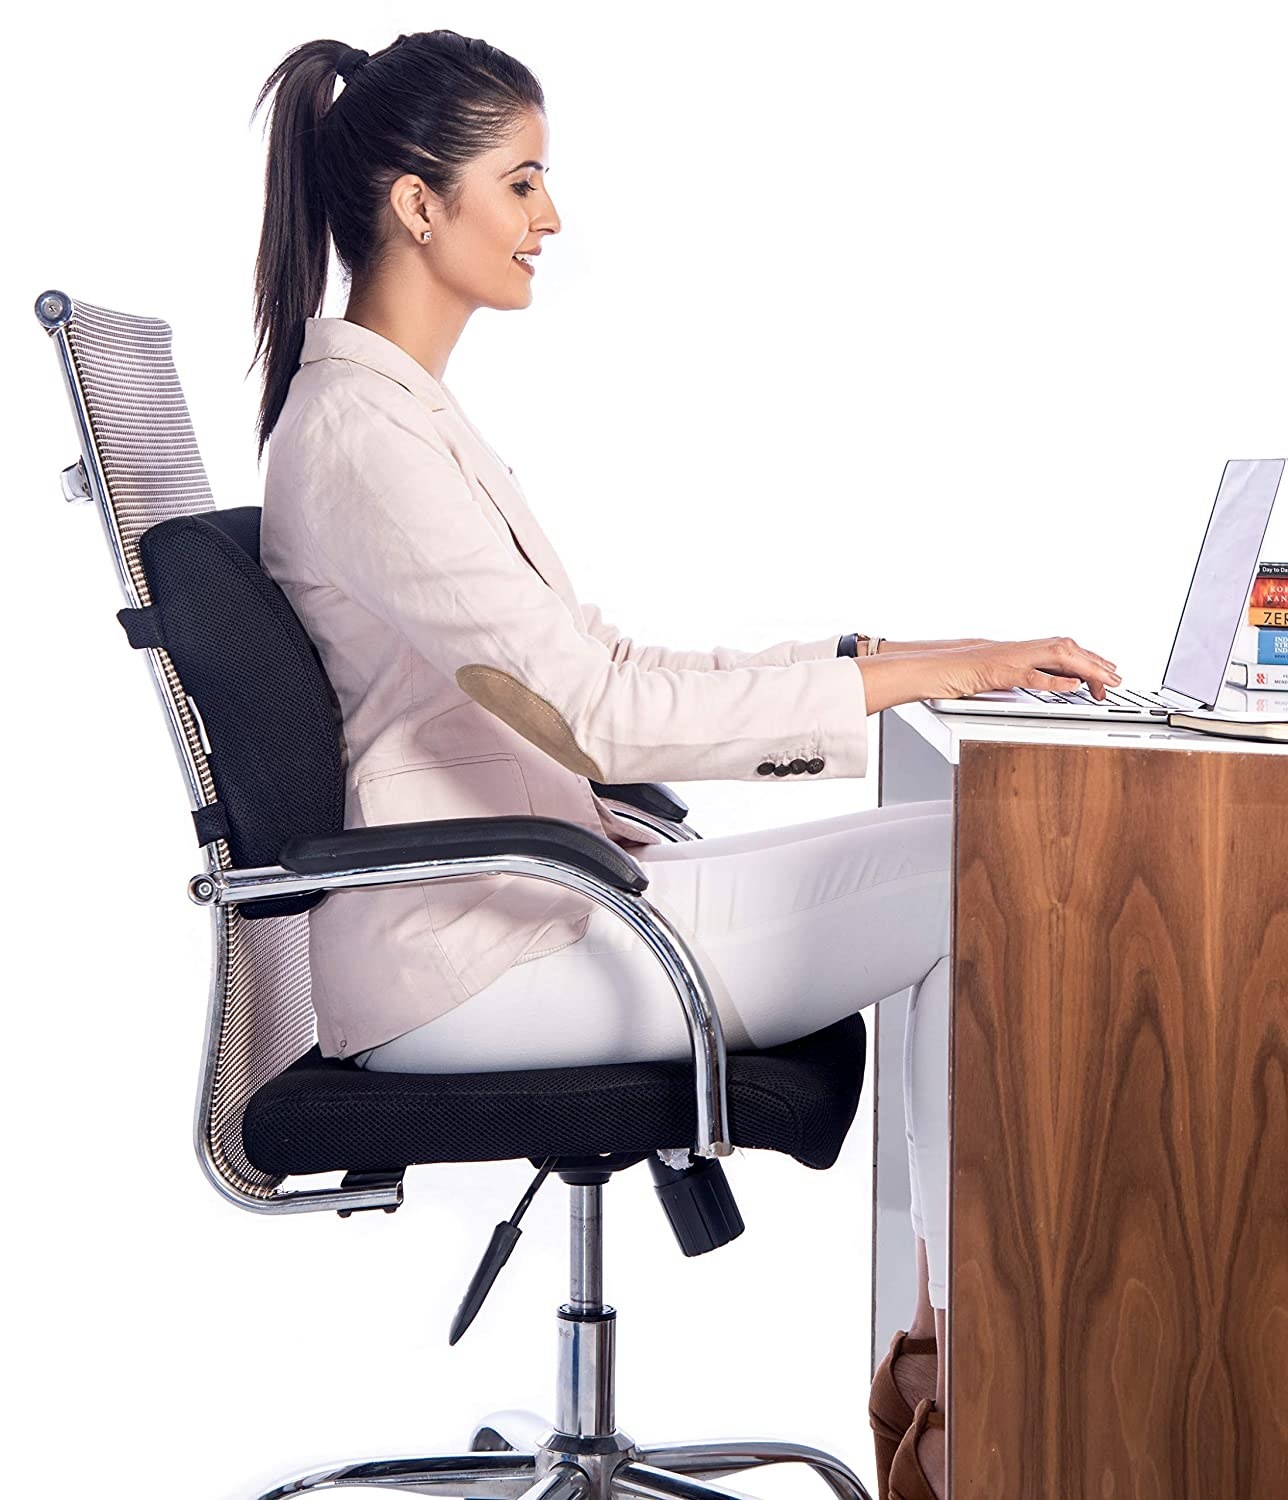 A woman using a laptop while sitting on a chair with the back cushion attached to it